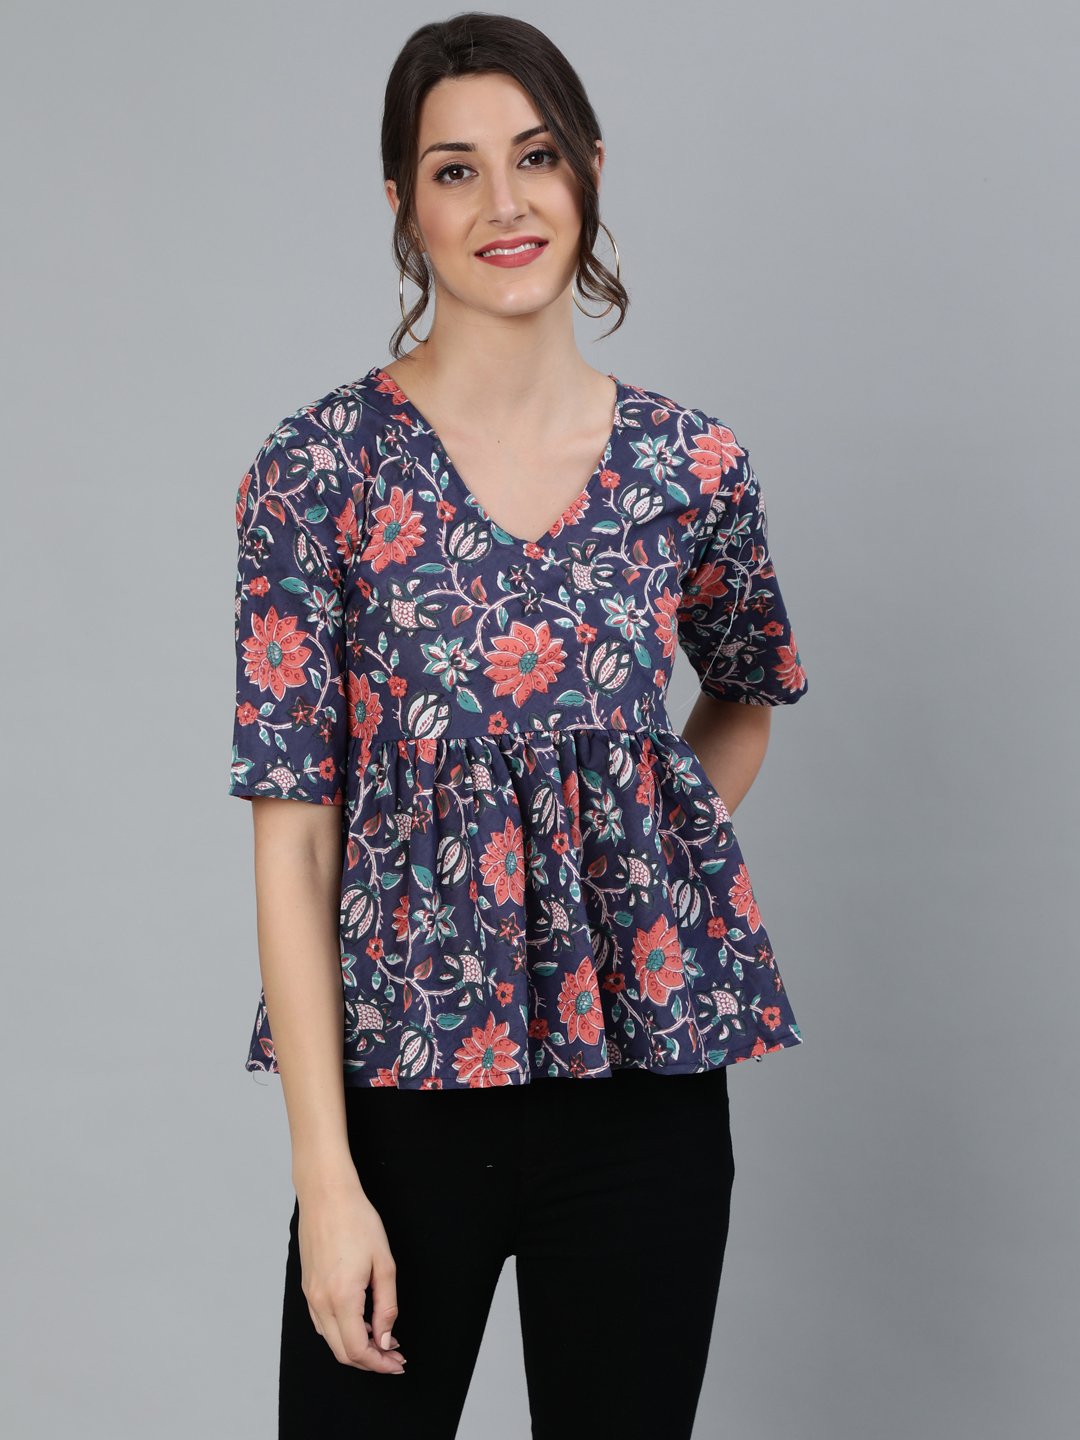 Women's Blue Printed Top With V Neck & Three Quarter Sleeves - Nayo Clothing